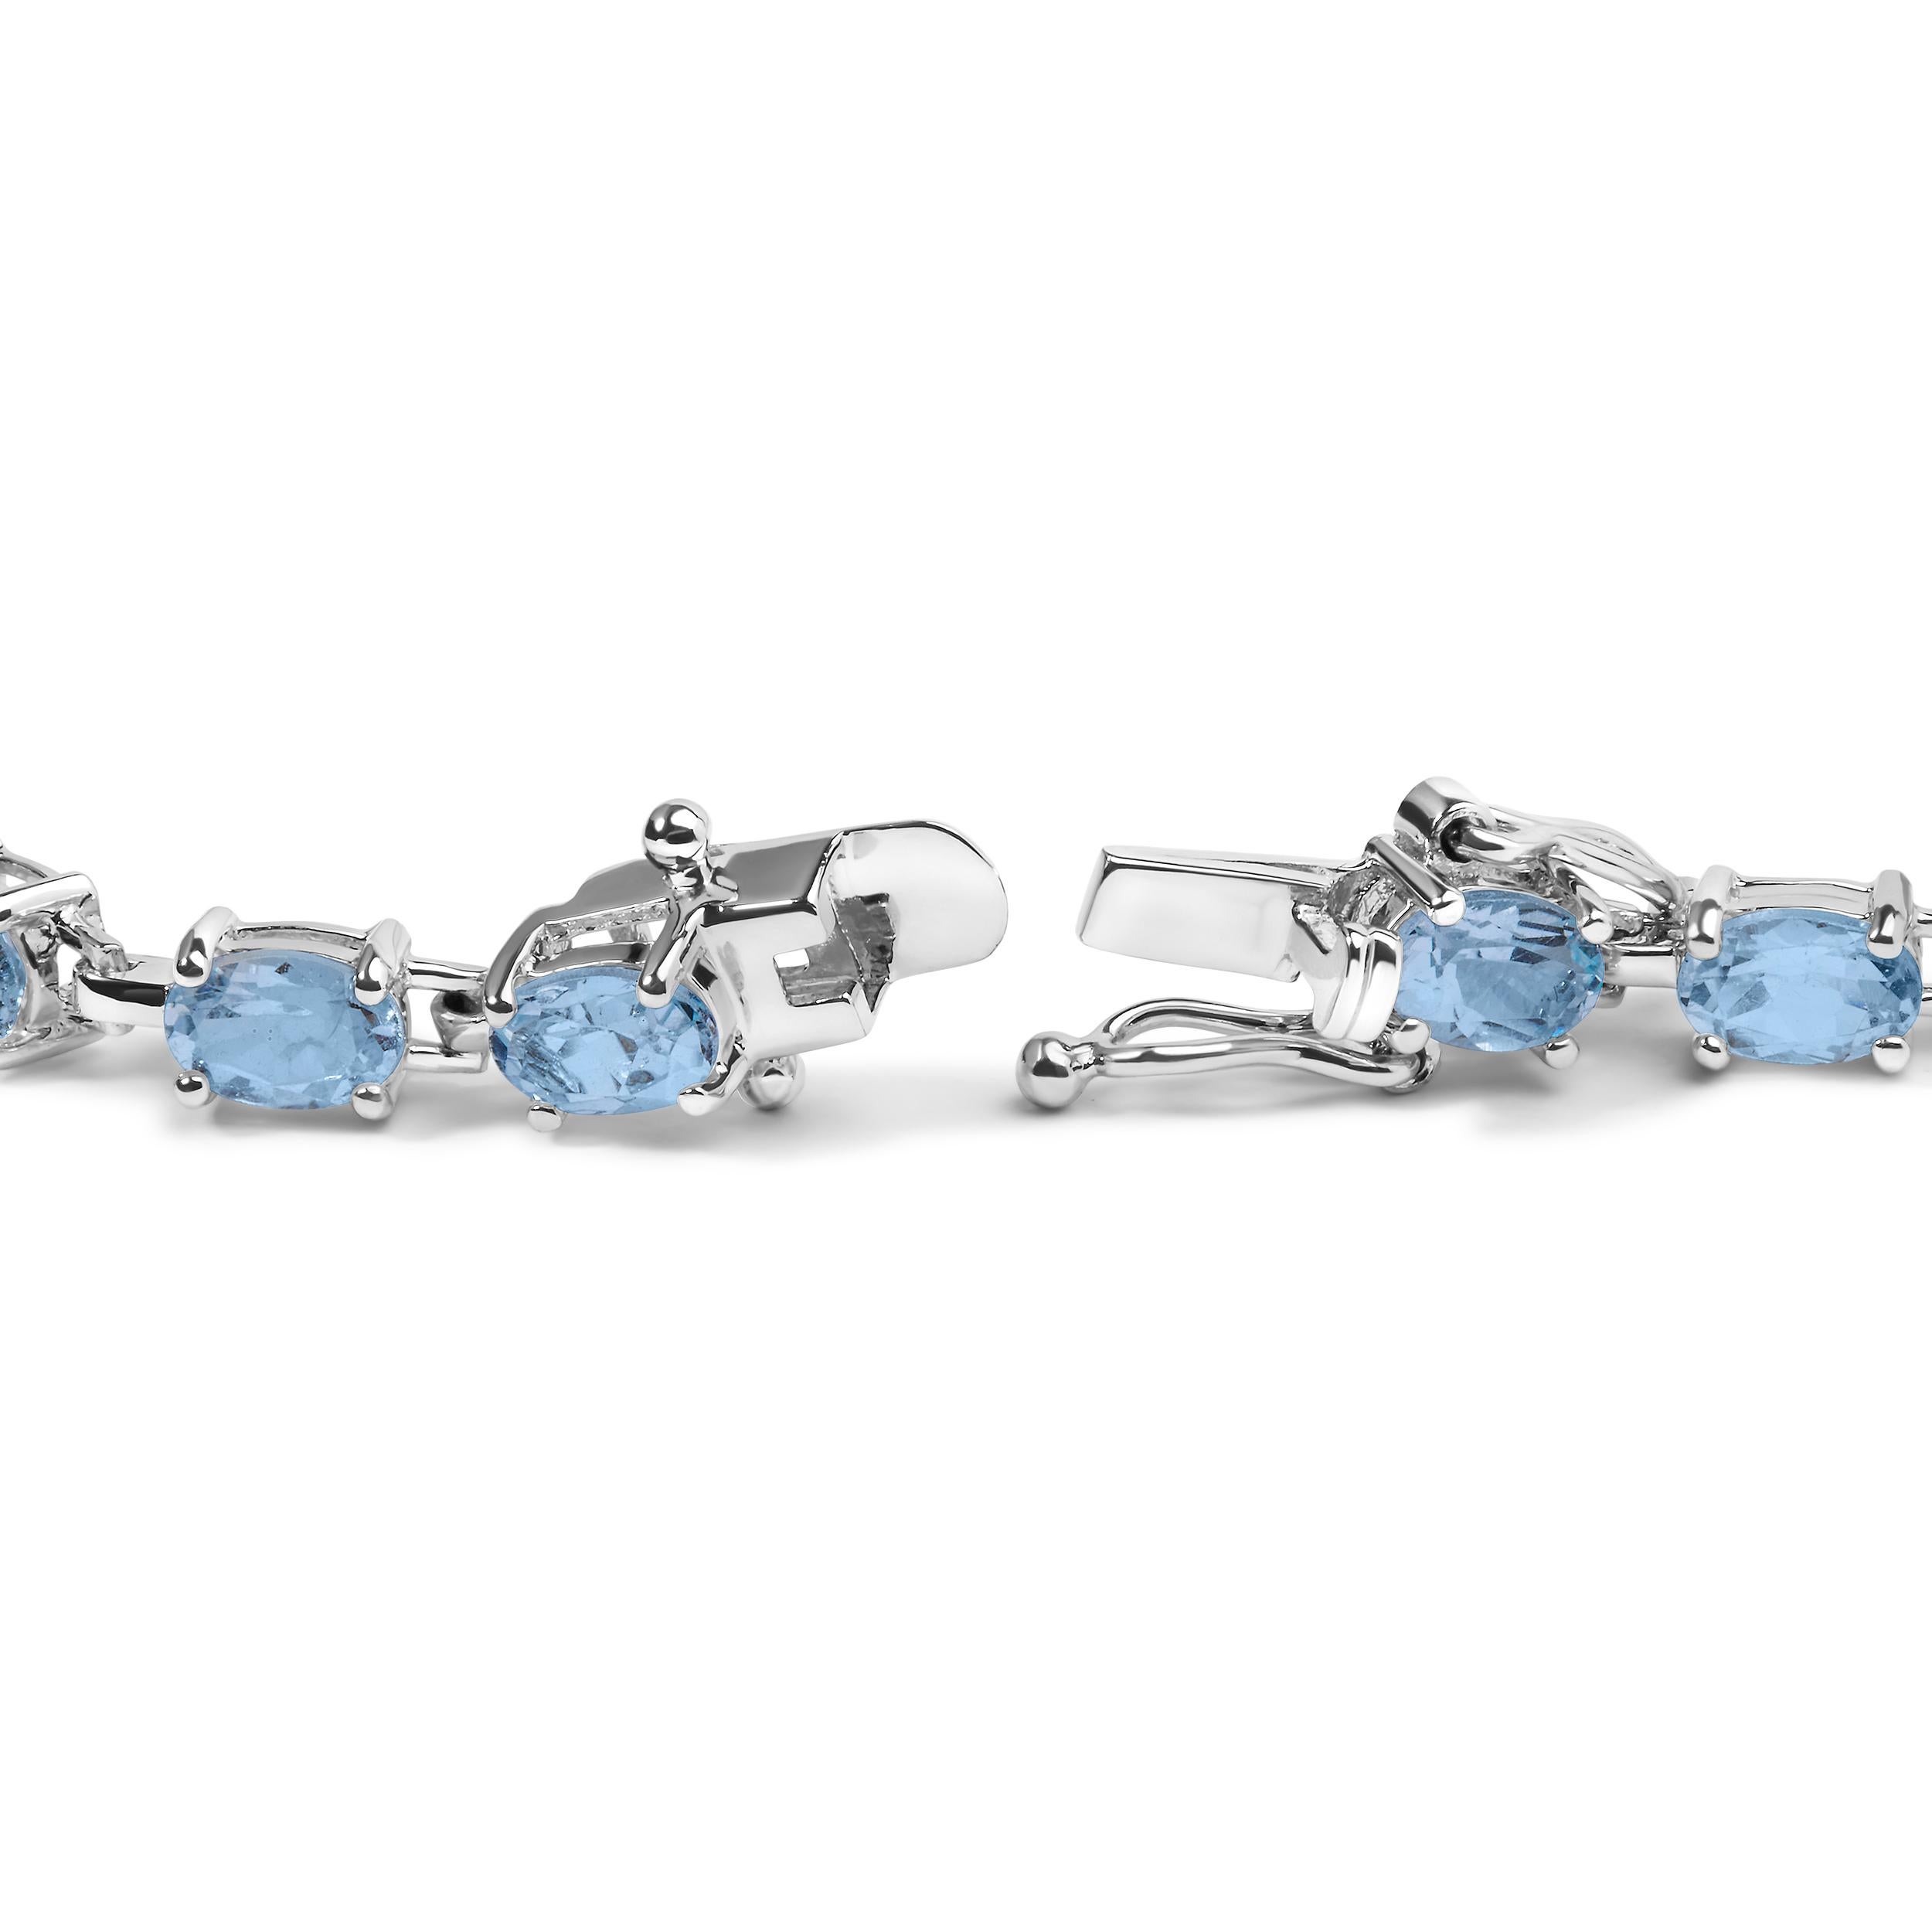 Indulge in the enchanting allure of this .925 Sterling Silver Link Bracelet. Adorned with 20 exquisite oval-shaped, lab-created Light Blue Topaz gemstones, totaling a remarkable 11 carats, this bracelet exudes elegance and sophistication. The